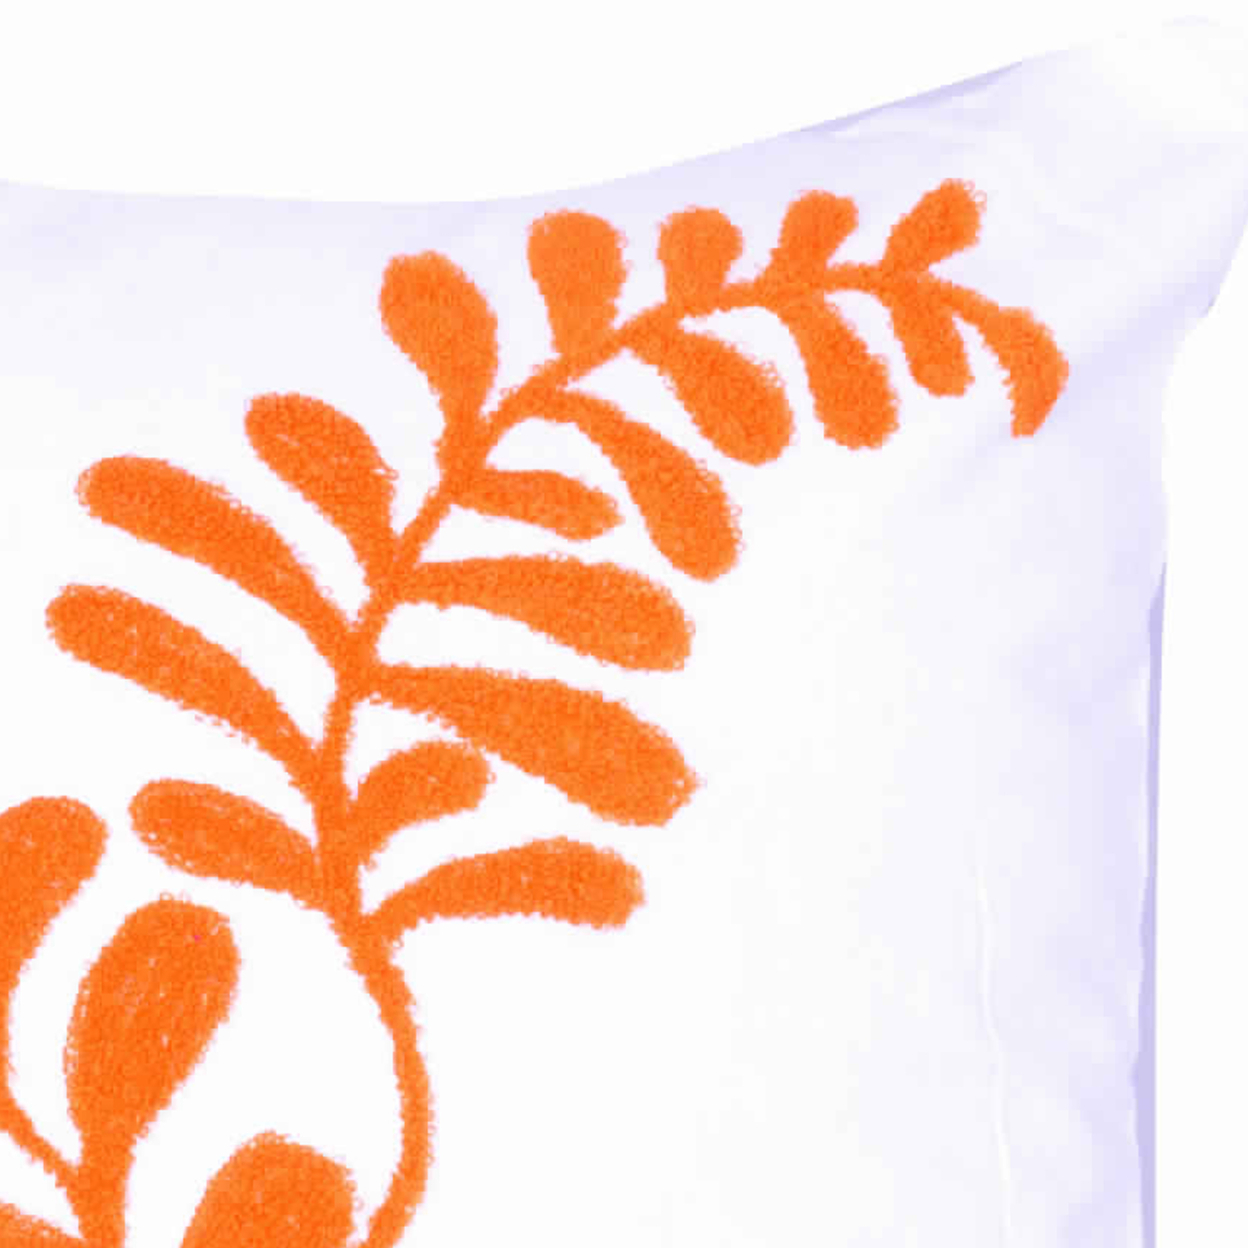 18 X 18 Inch Cotton Pillow With Sprig Pattern Embroidery, Set Of 2, Orange- Saltoro Sherpi